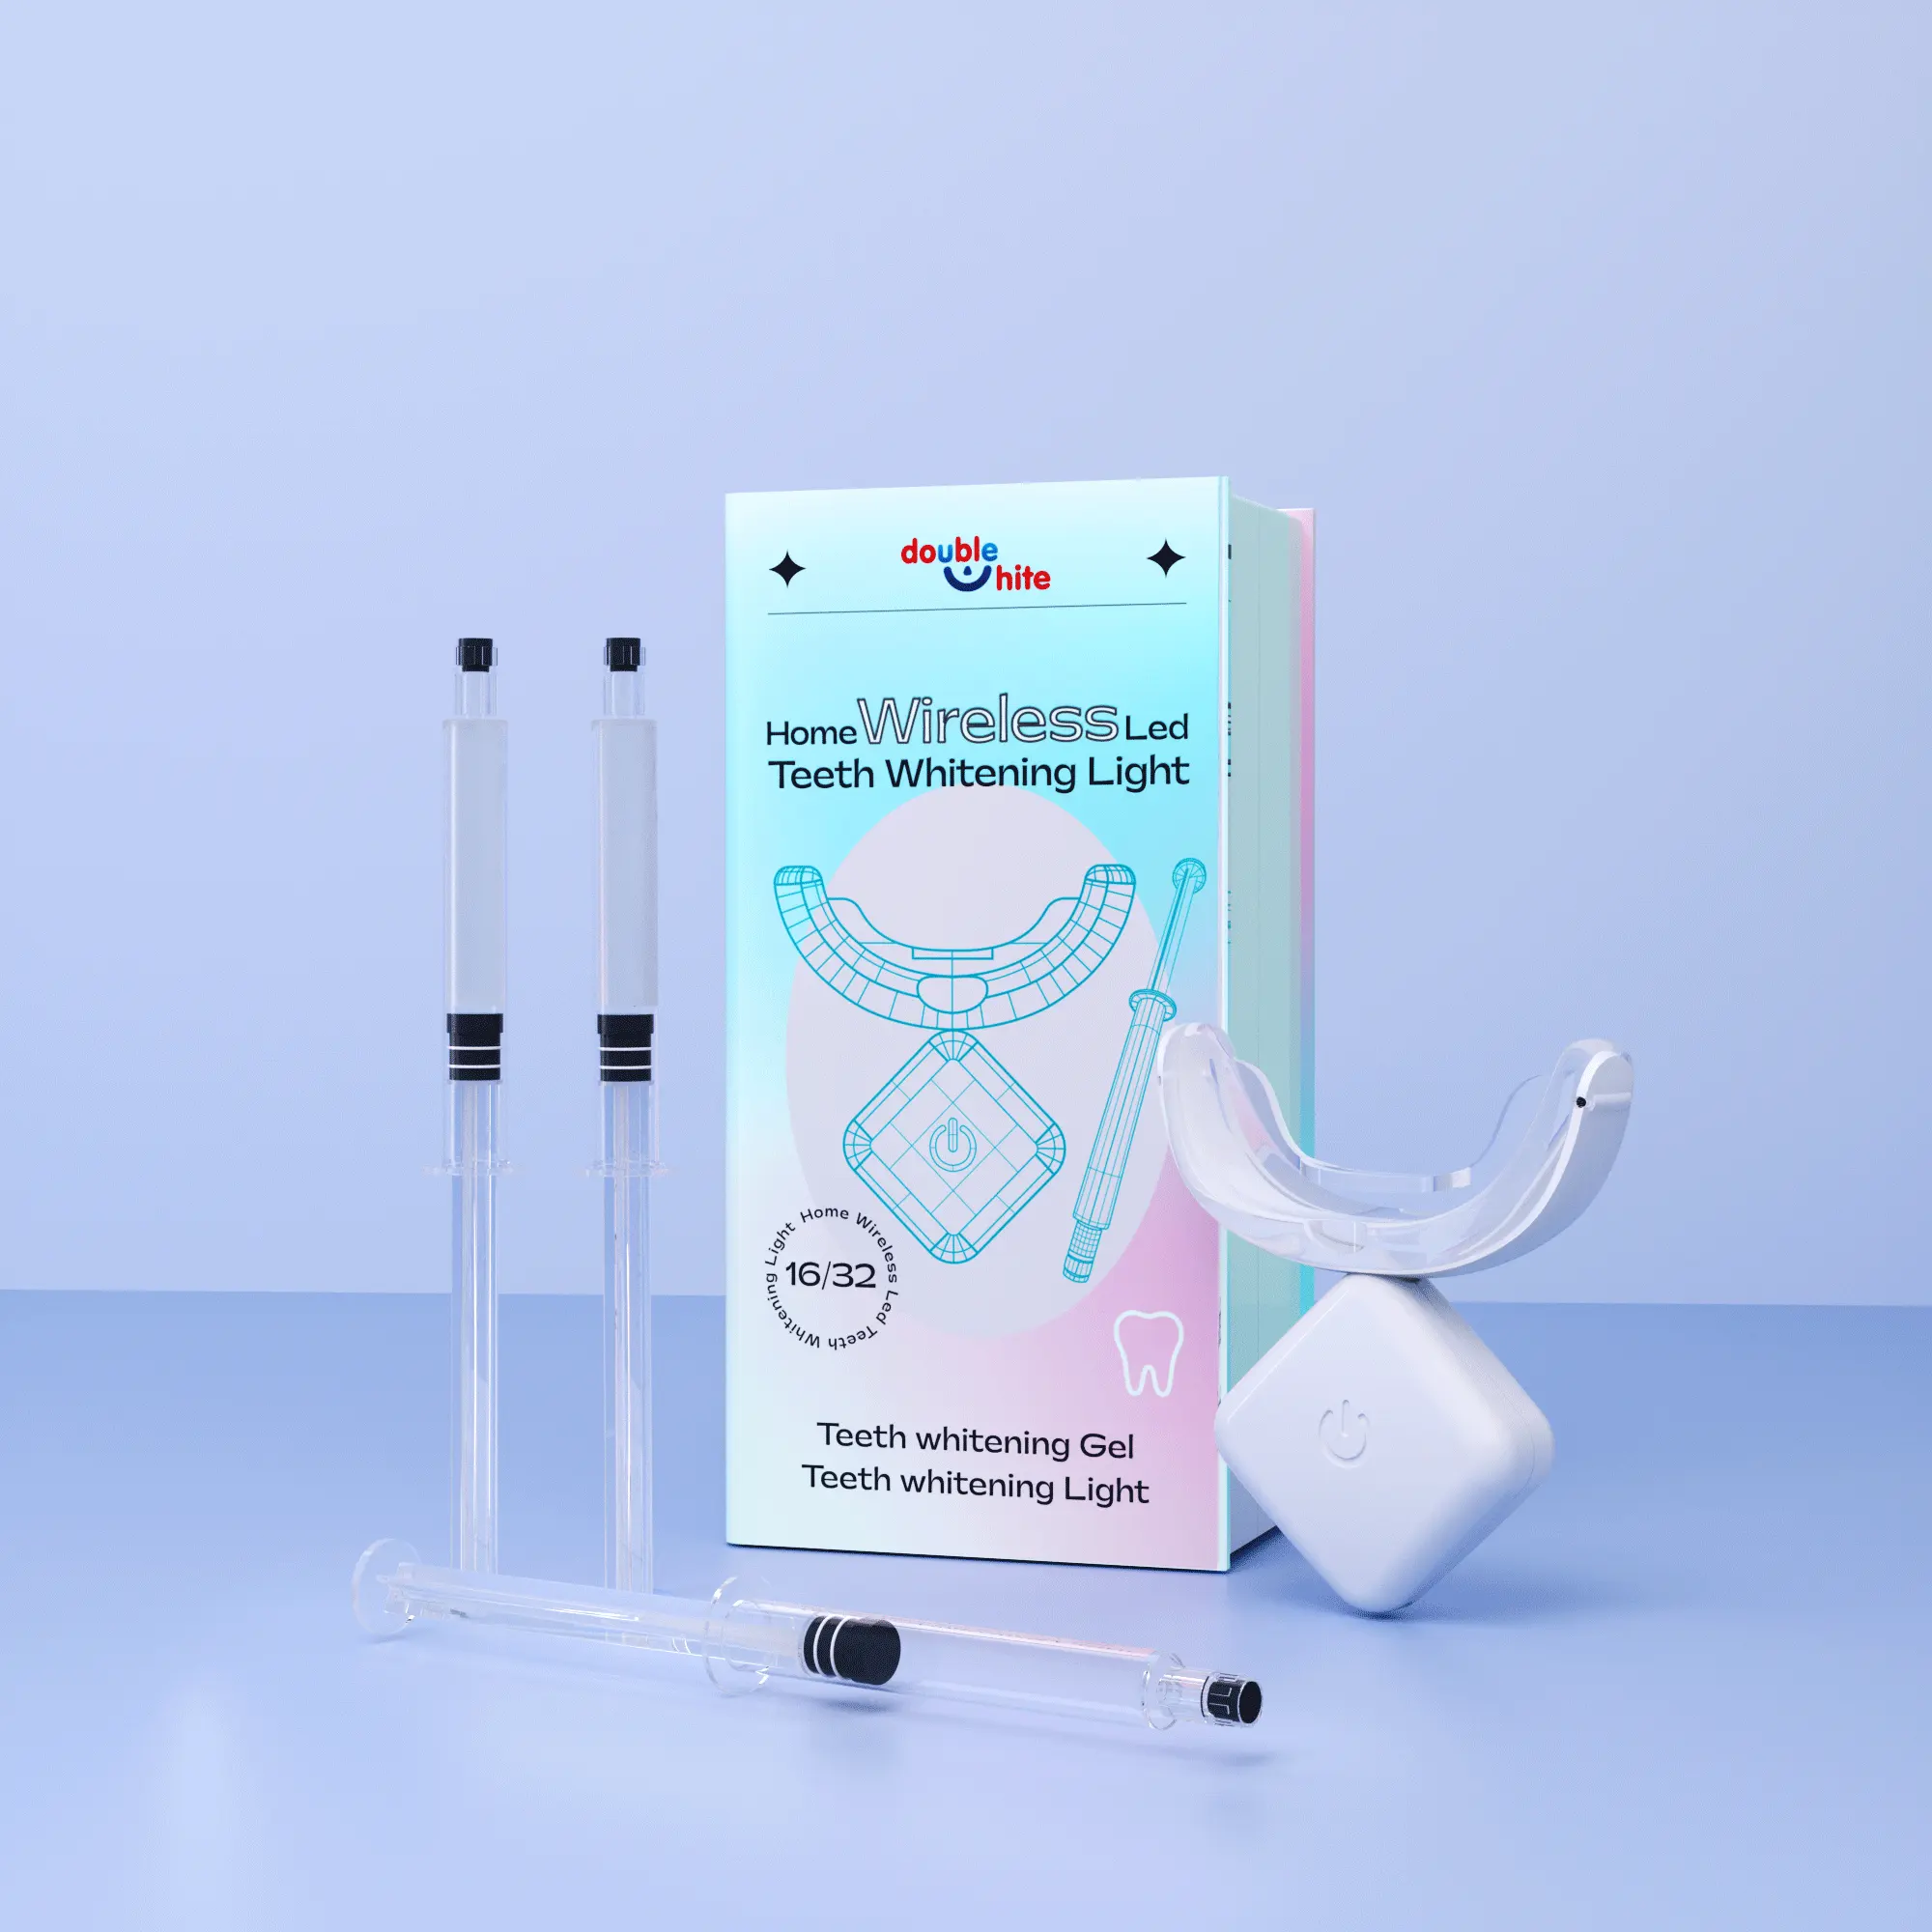 Double White hydrogen peroxide professional in office teeth white kit customized led teeth whitening kit oem